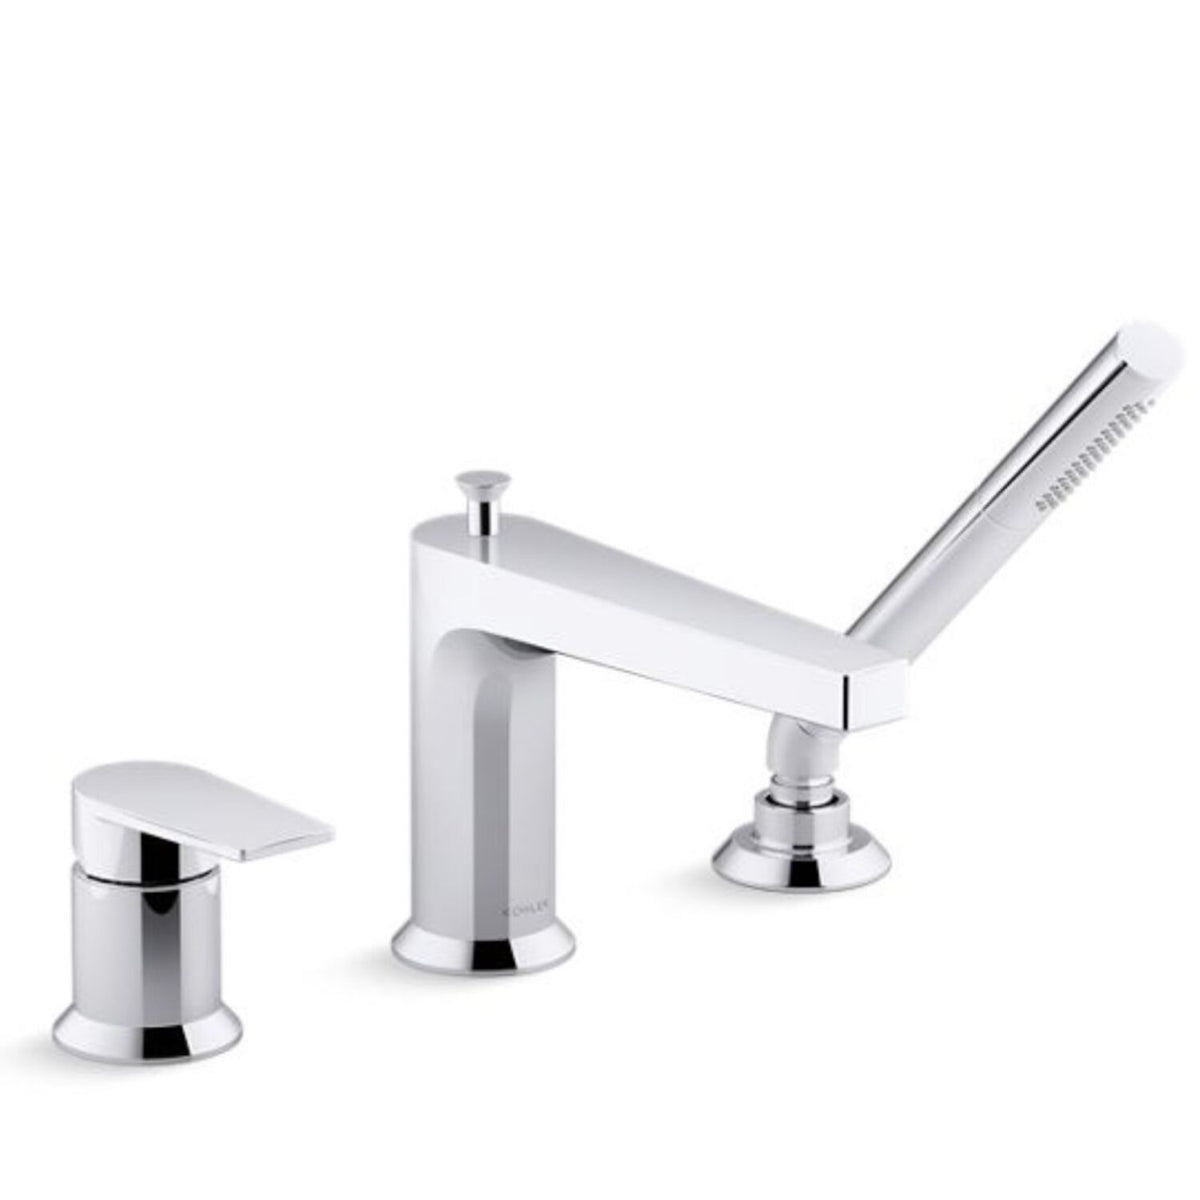 TAUT® 11 GPM DECK-MOUNT BATH FAUCET WITH HANDSHOWER